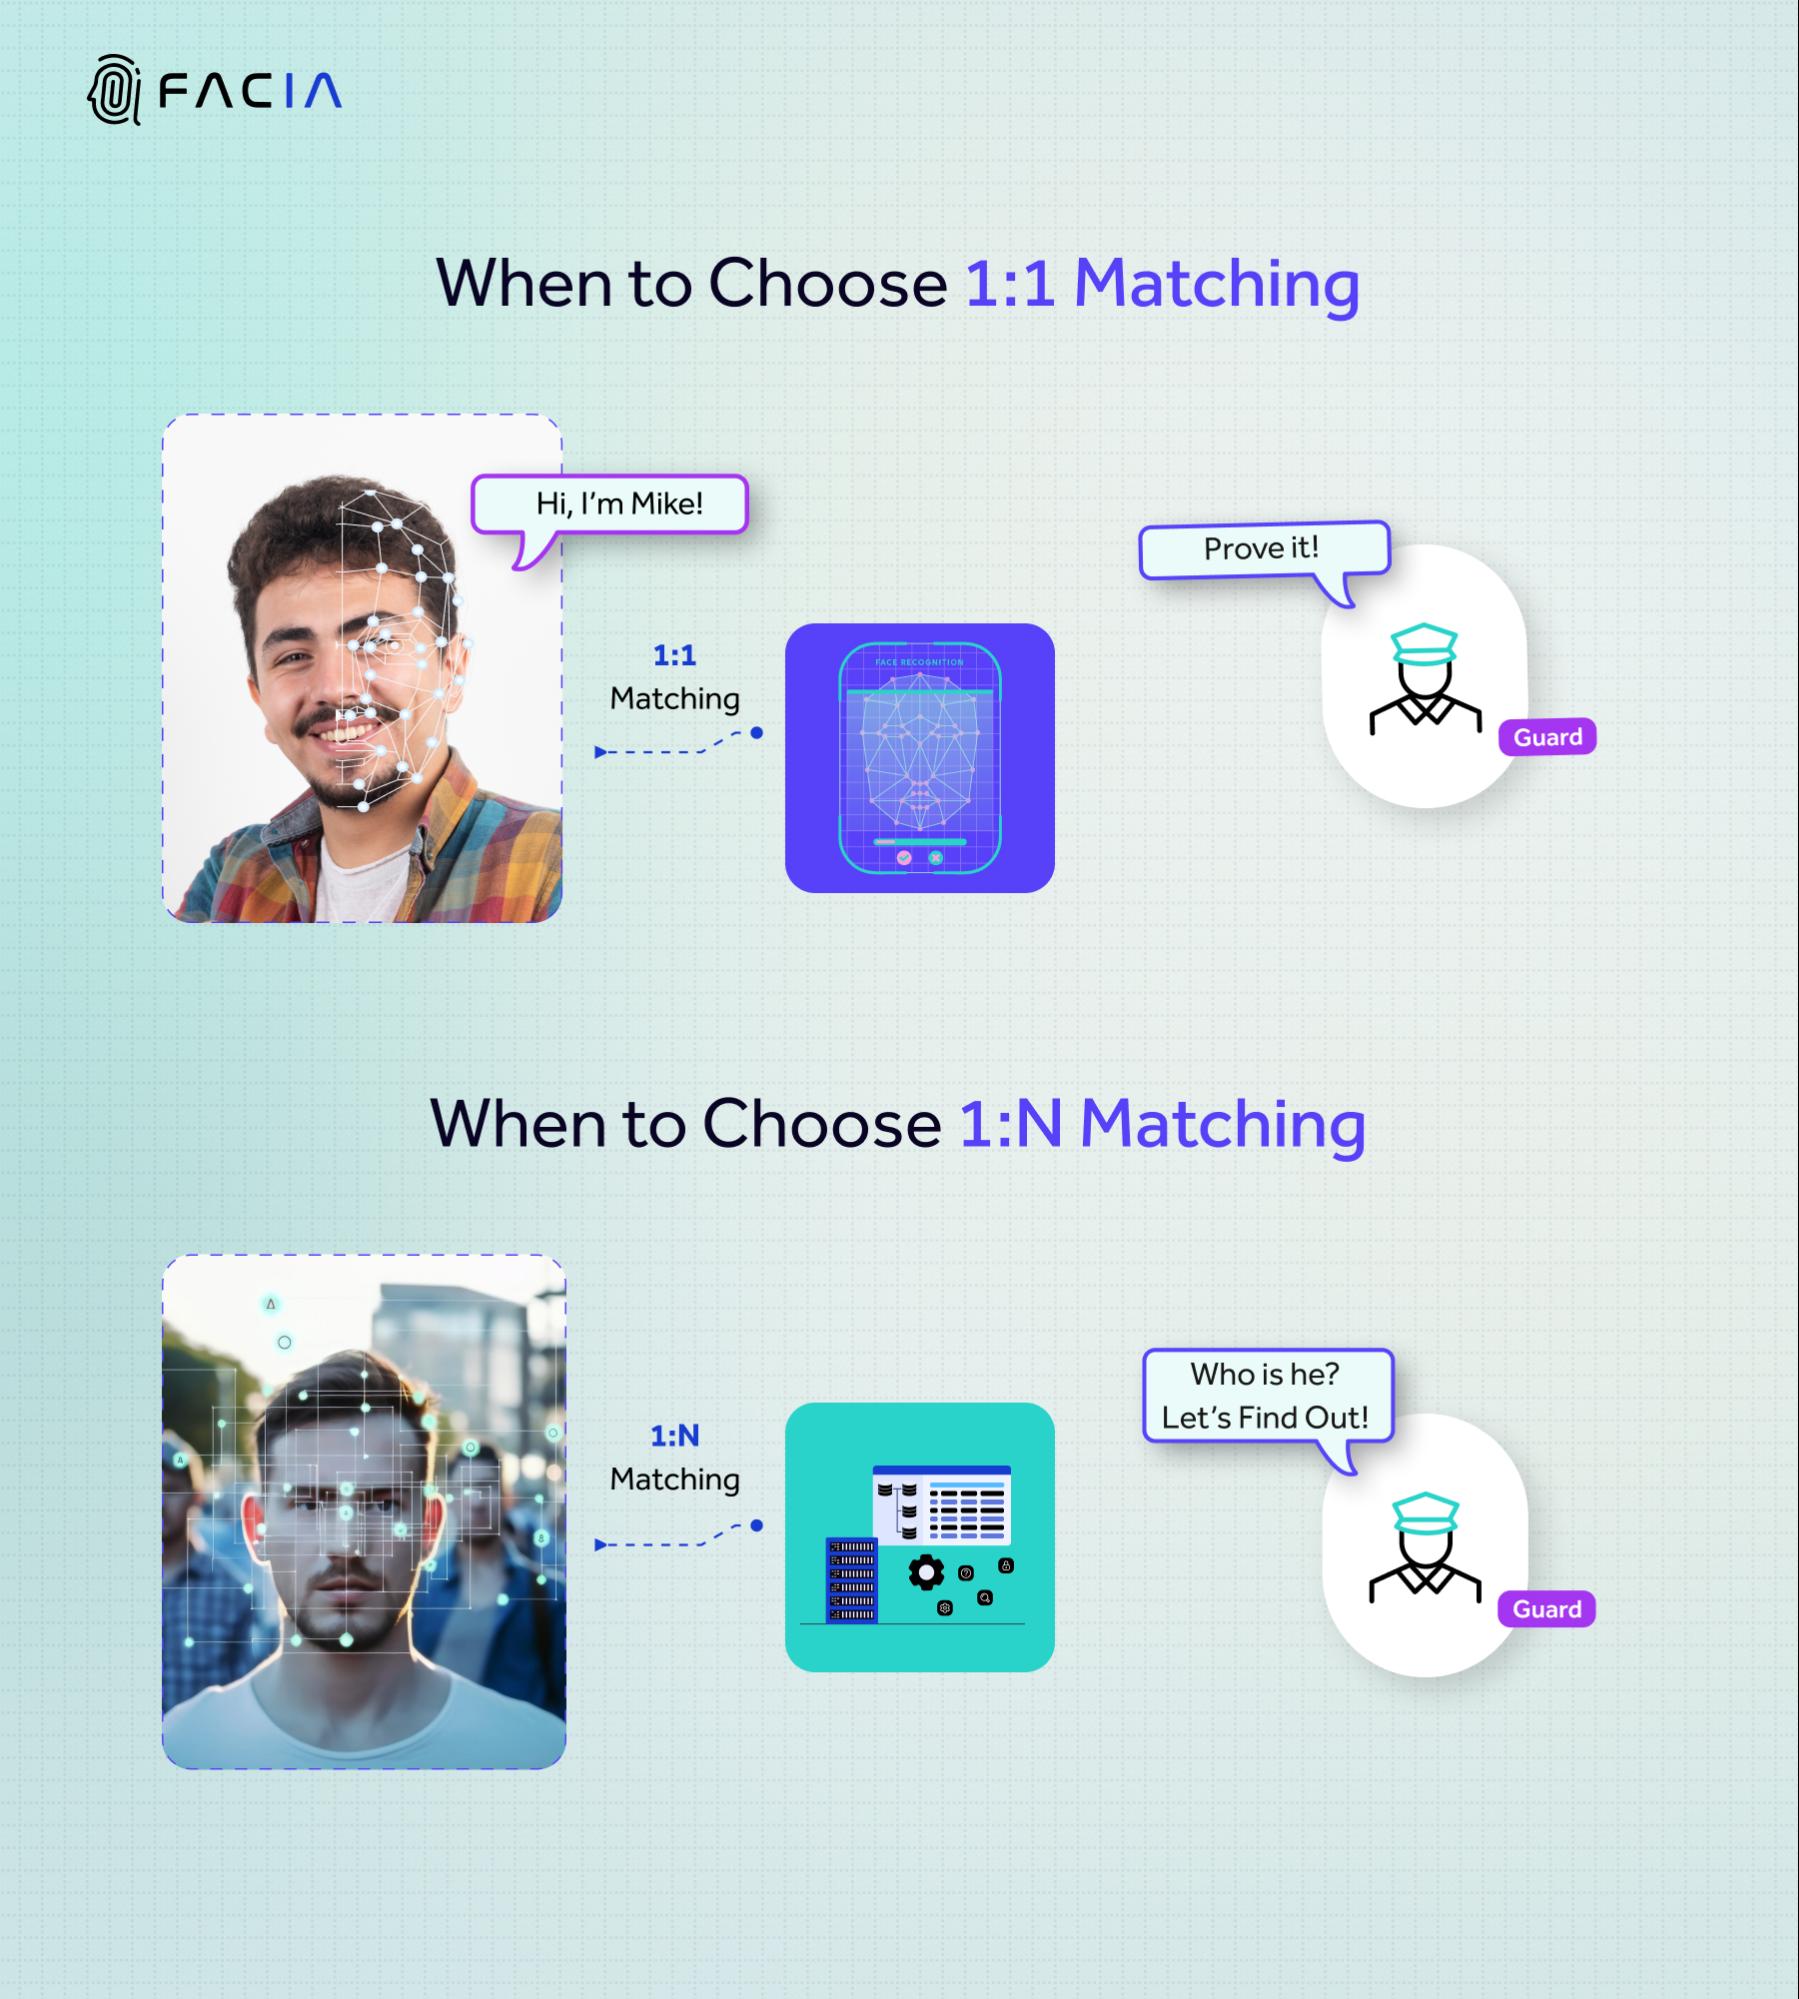 The image shows the difference between 1:1 matching and 1:N matching by showing how 1:N is used when trying to discern identity while 1:1 is used when trying to verify identity.